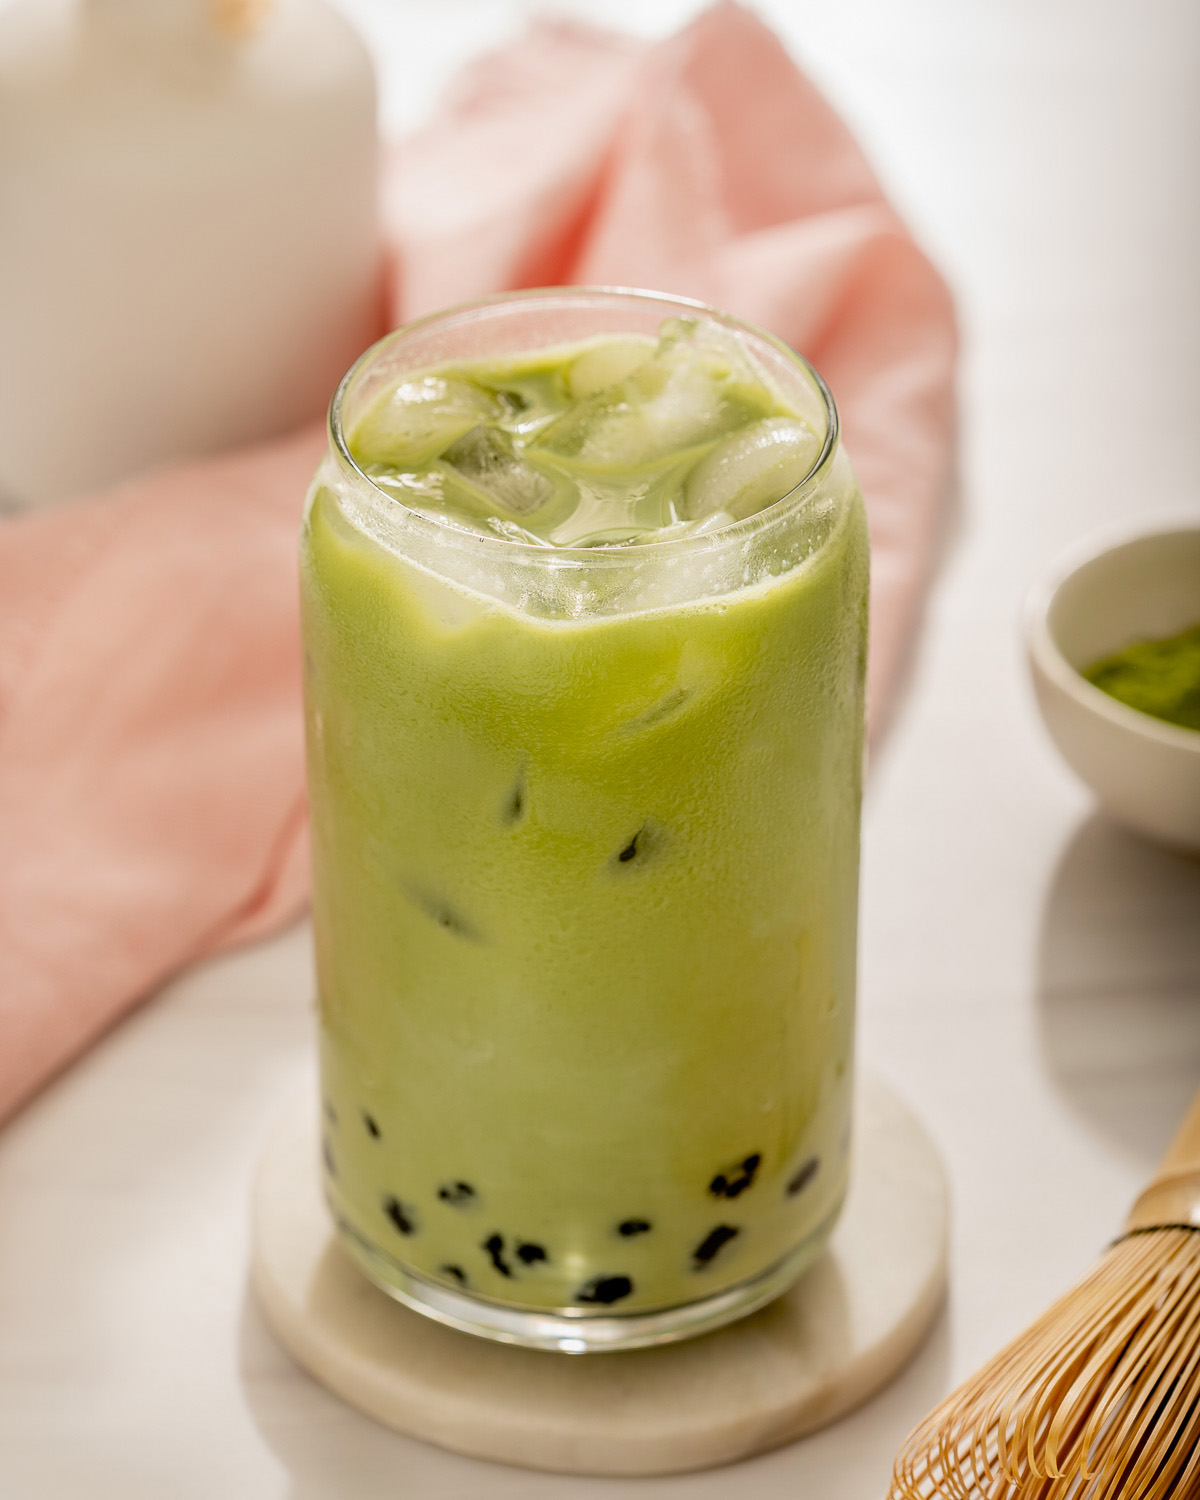 Up close with a glass of blended matcha milk tea with boba pearls.